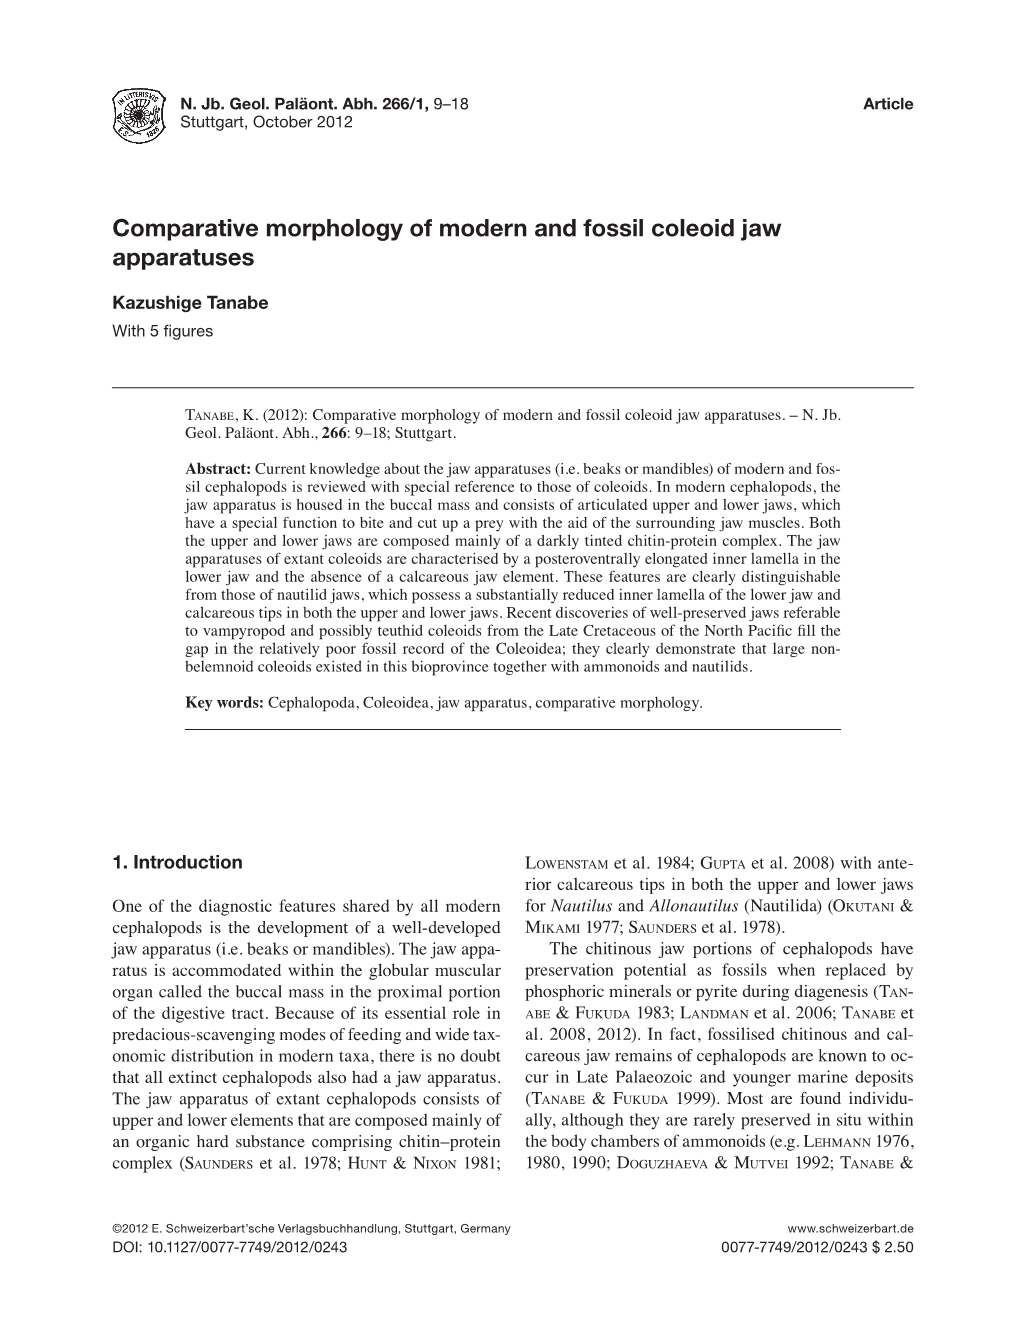 Comparative Morphology of Modern and Fossil Coleoid Jaw Apparatuses